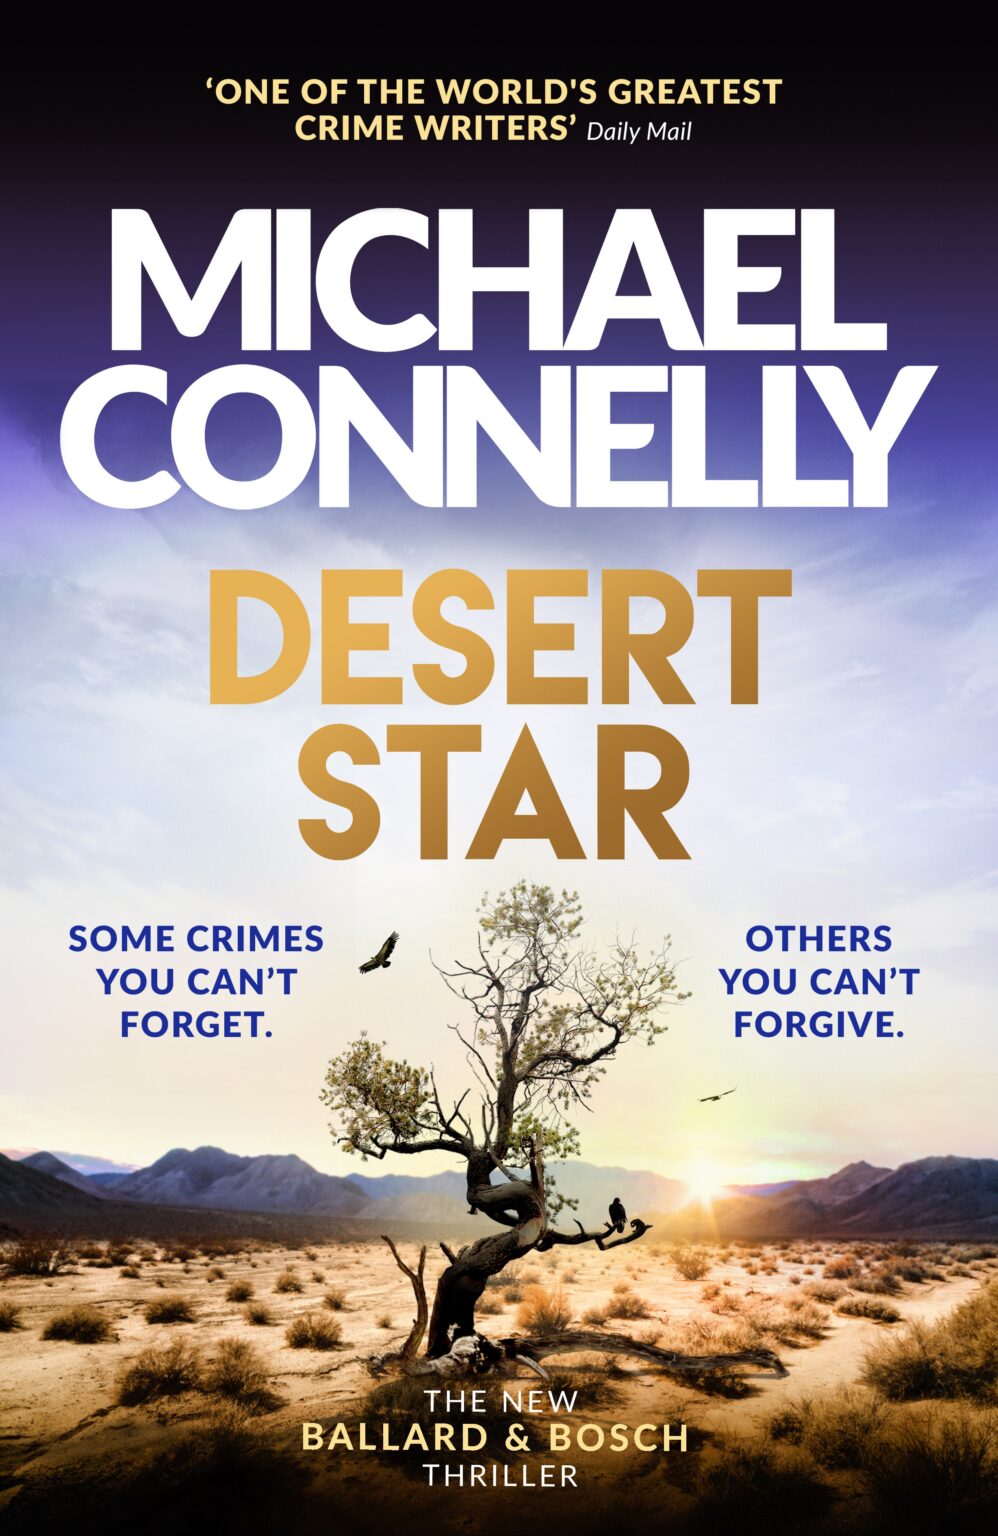 PreOrder A Signed Copy Of DESERT STAR Michael Connelly